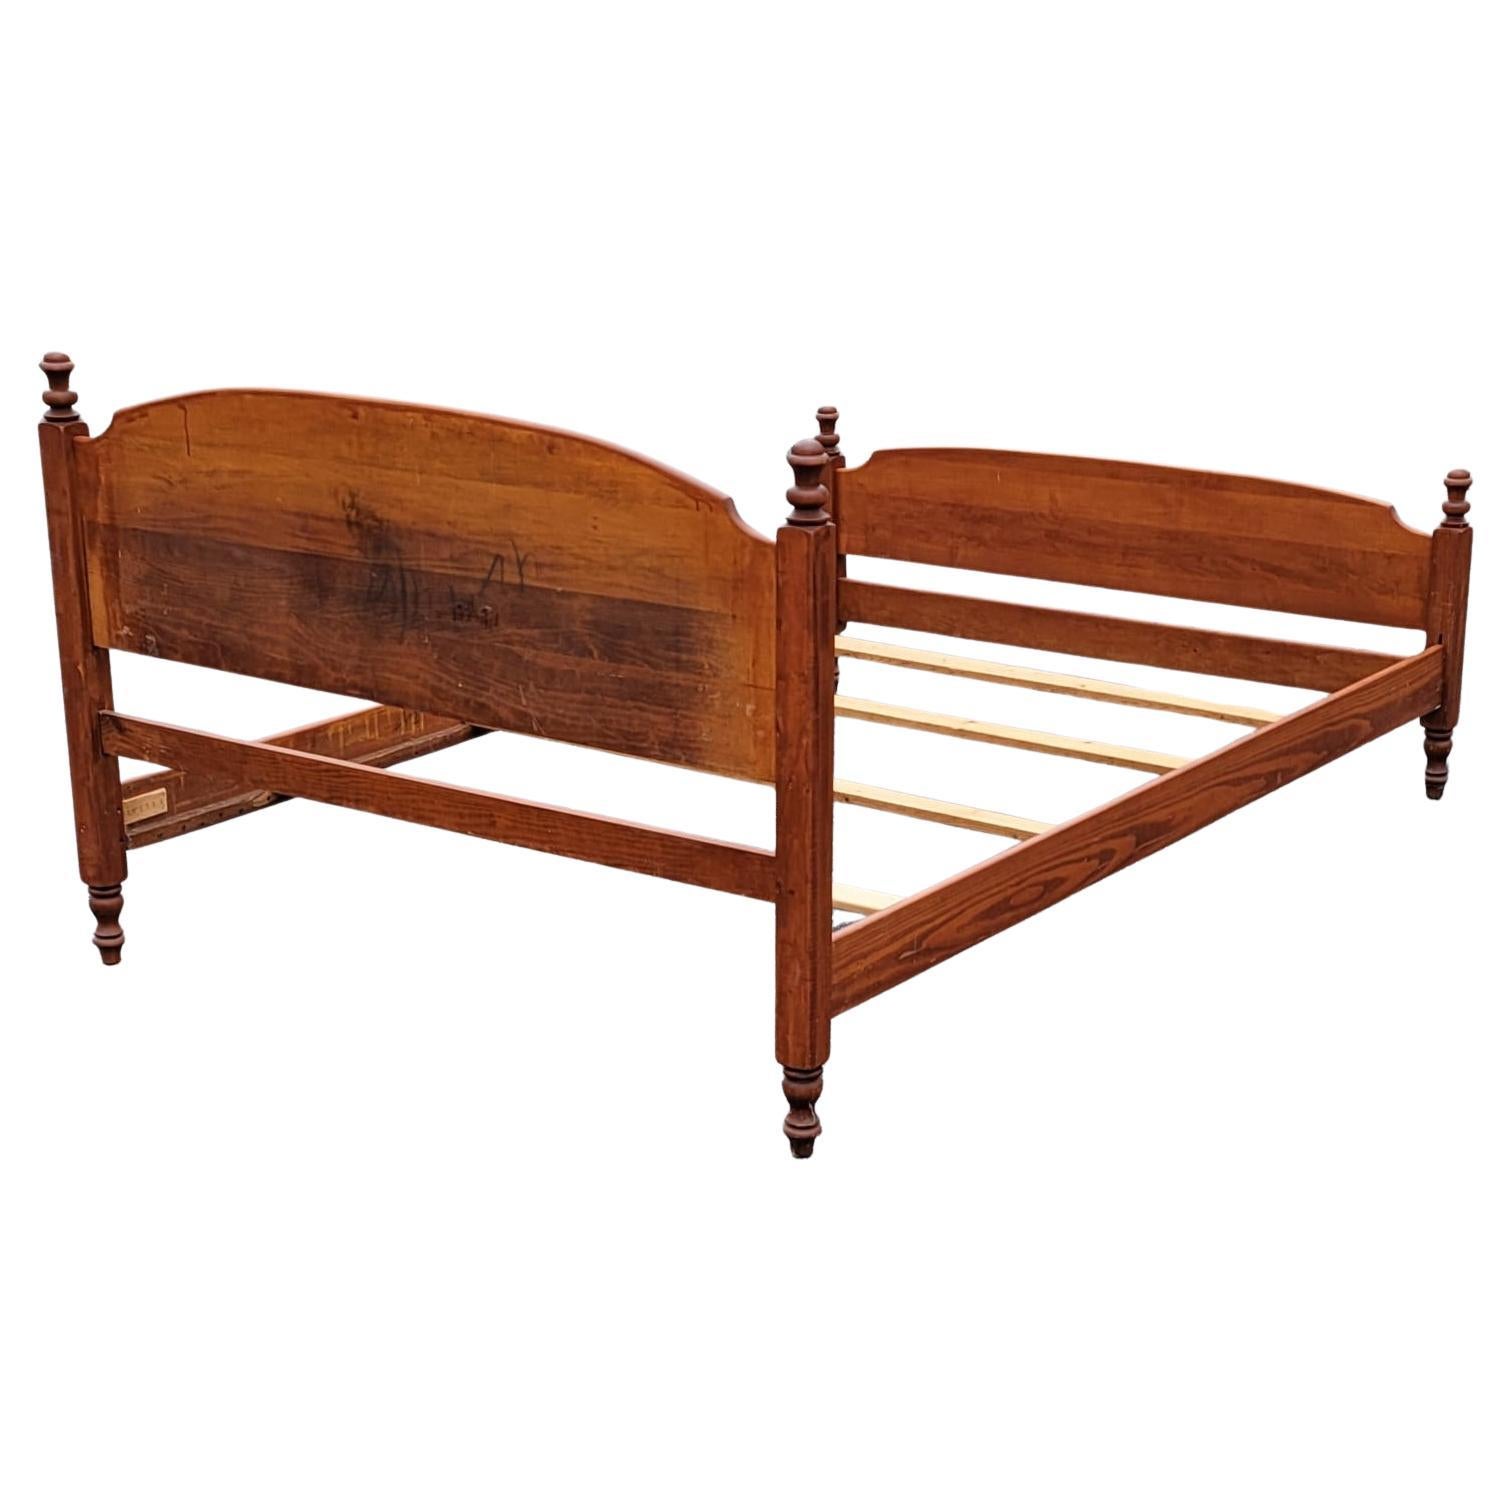 Hardwood American Classical Colonial Style Maple Full Size Bedstead